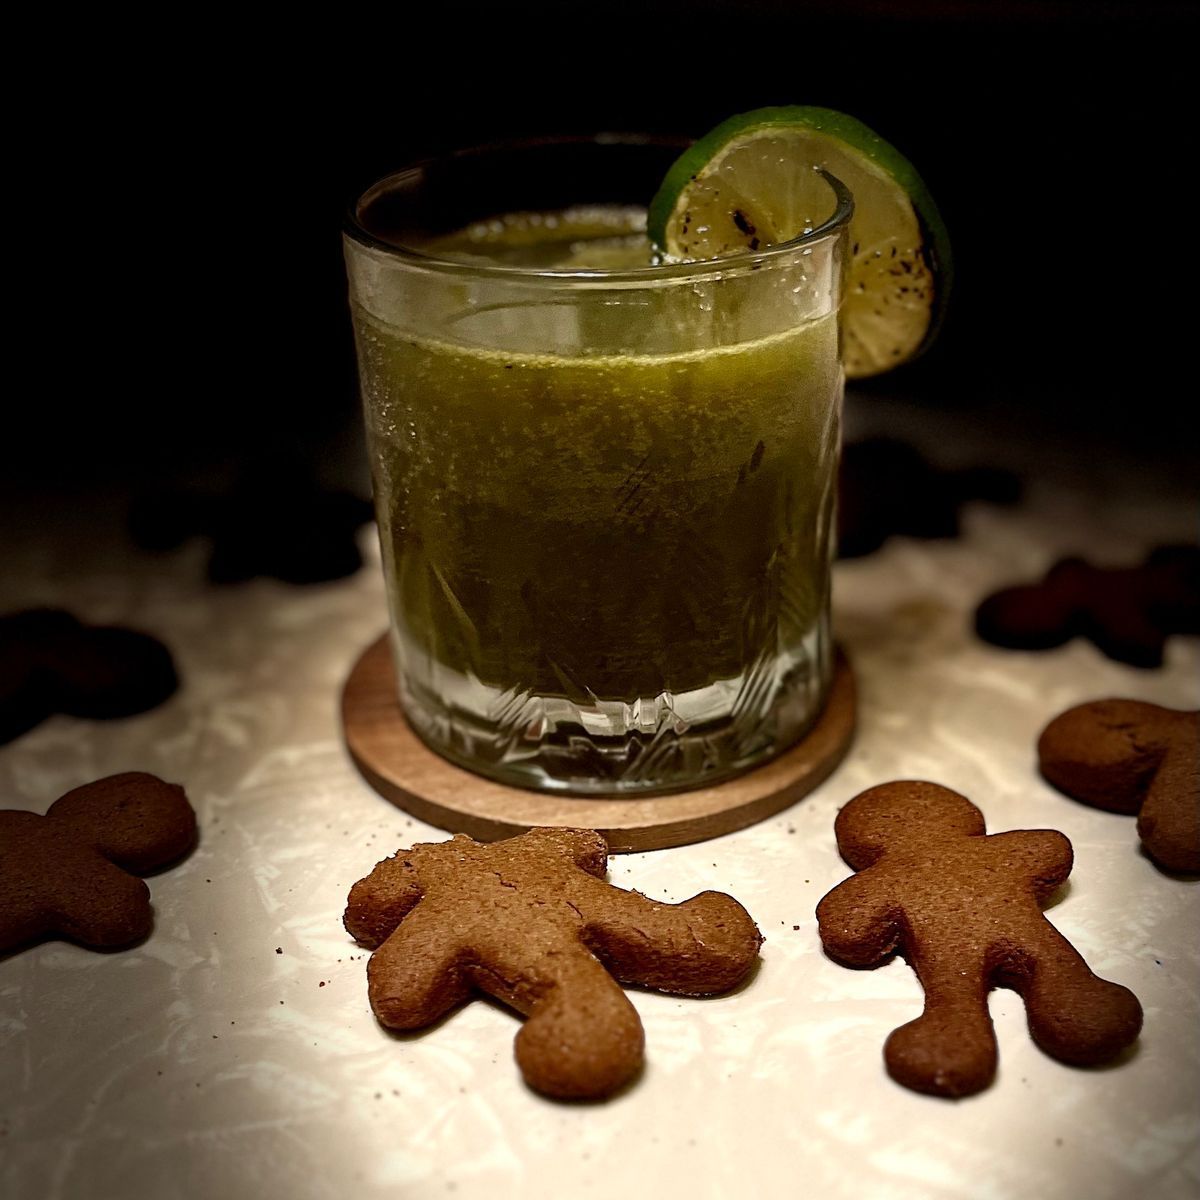 Grinch Mule

This tasty mule takes its inspiration from The Grinch. We’re talking beginning of the story— not the guy who saves Christmas and himself carves the roast beast 🍗

It’s a dirty, earthy green that’s perfect for the filth of the Grinch. It has an earthy, spicy, loamy flavor thanks to the ginger and matcha, the carmelized lime lends bite as you take each sip, and the anejo tequila gives it a rich depth. 

And while you can argue that the Grinch would have sucked less if some old dude wasn’t constantly singing about what a piece of shit he is, he’s still… well… a grinch! 